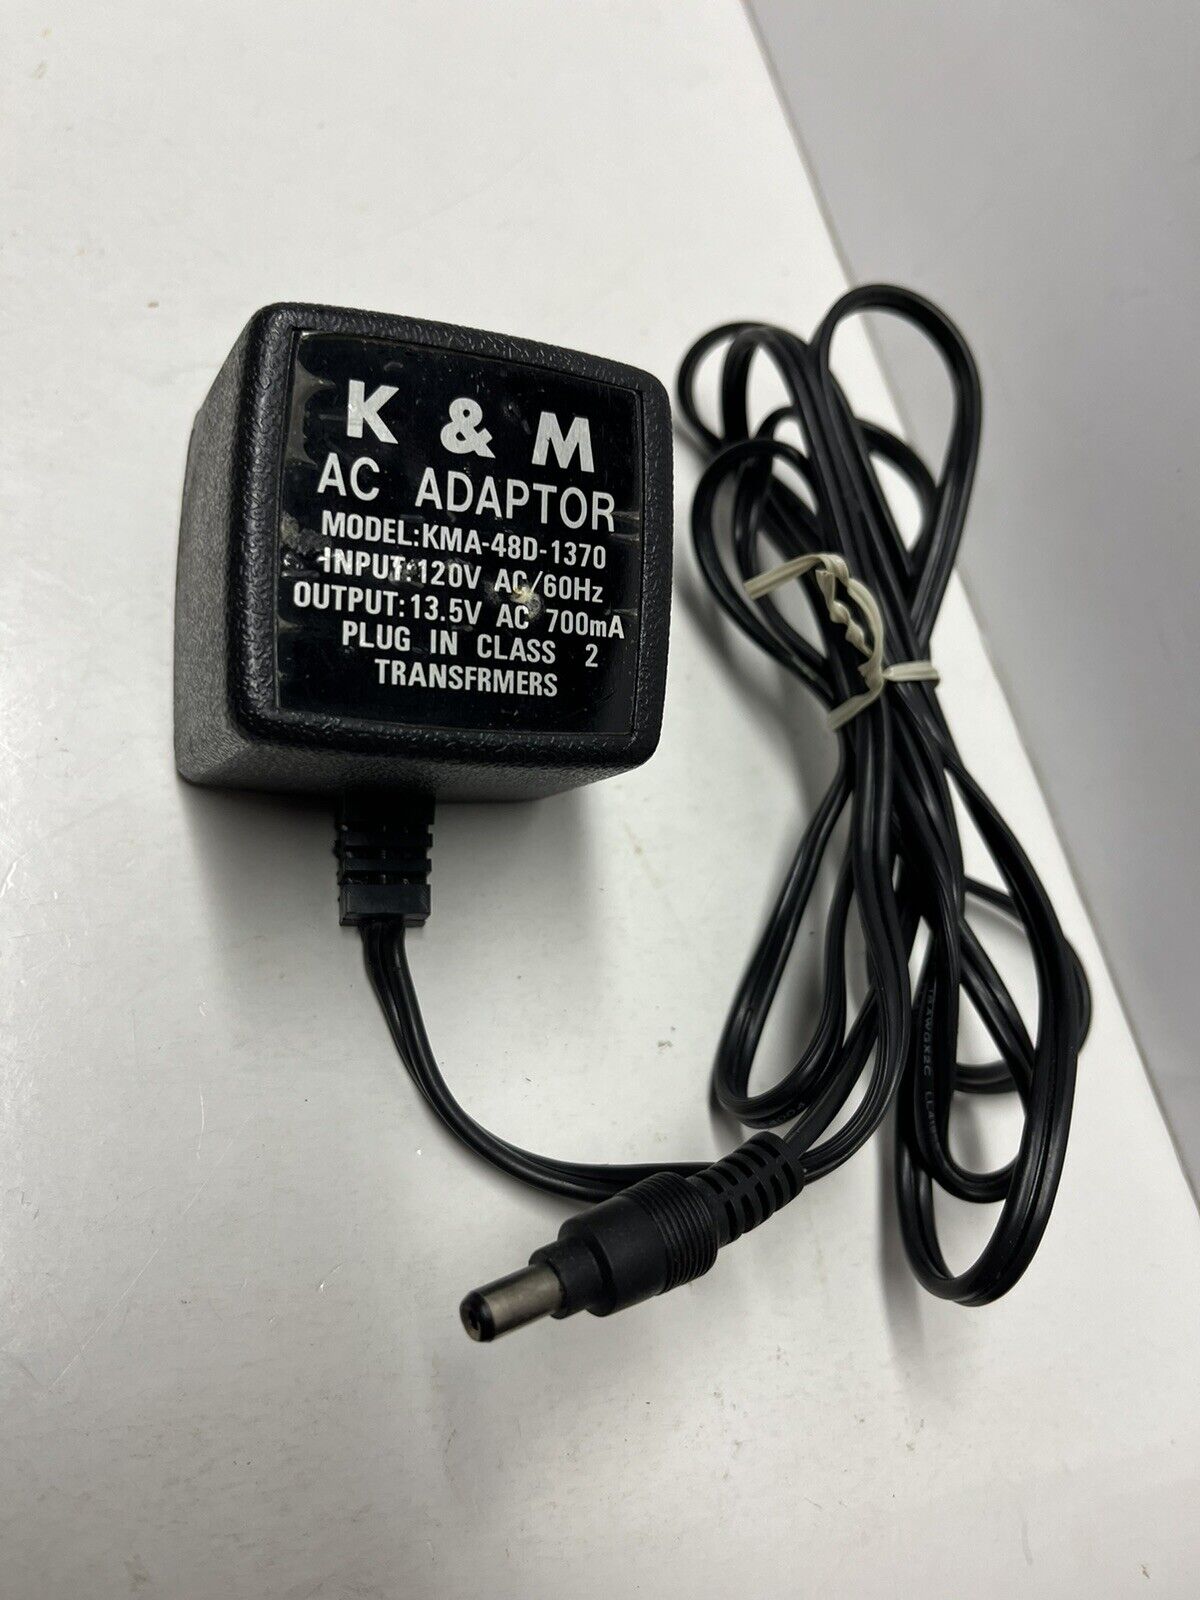 *Brand NEW* K & M AC Adaptor 13.5V KMA-48D-1370 AC 700mA AC DC ADAPTER POWER SUPPLY - Click Image to Close